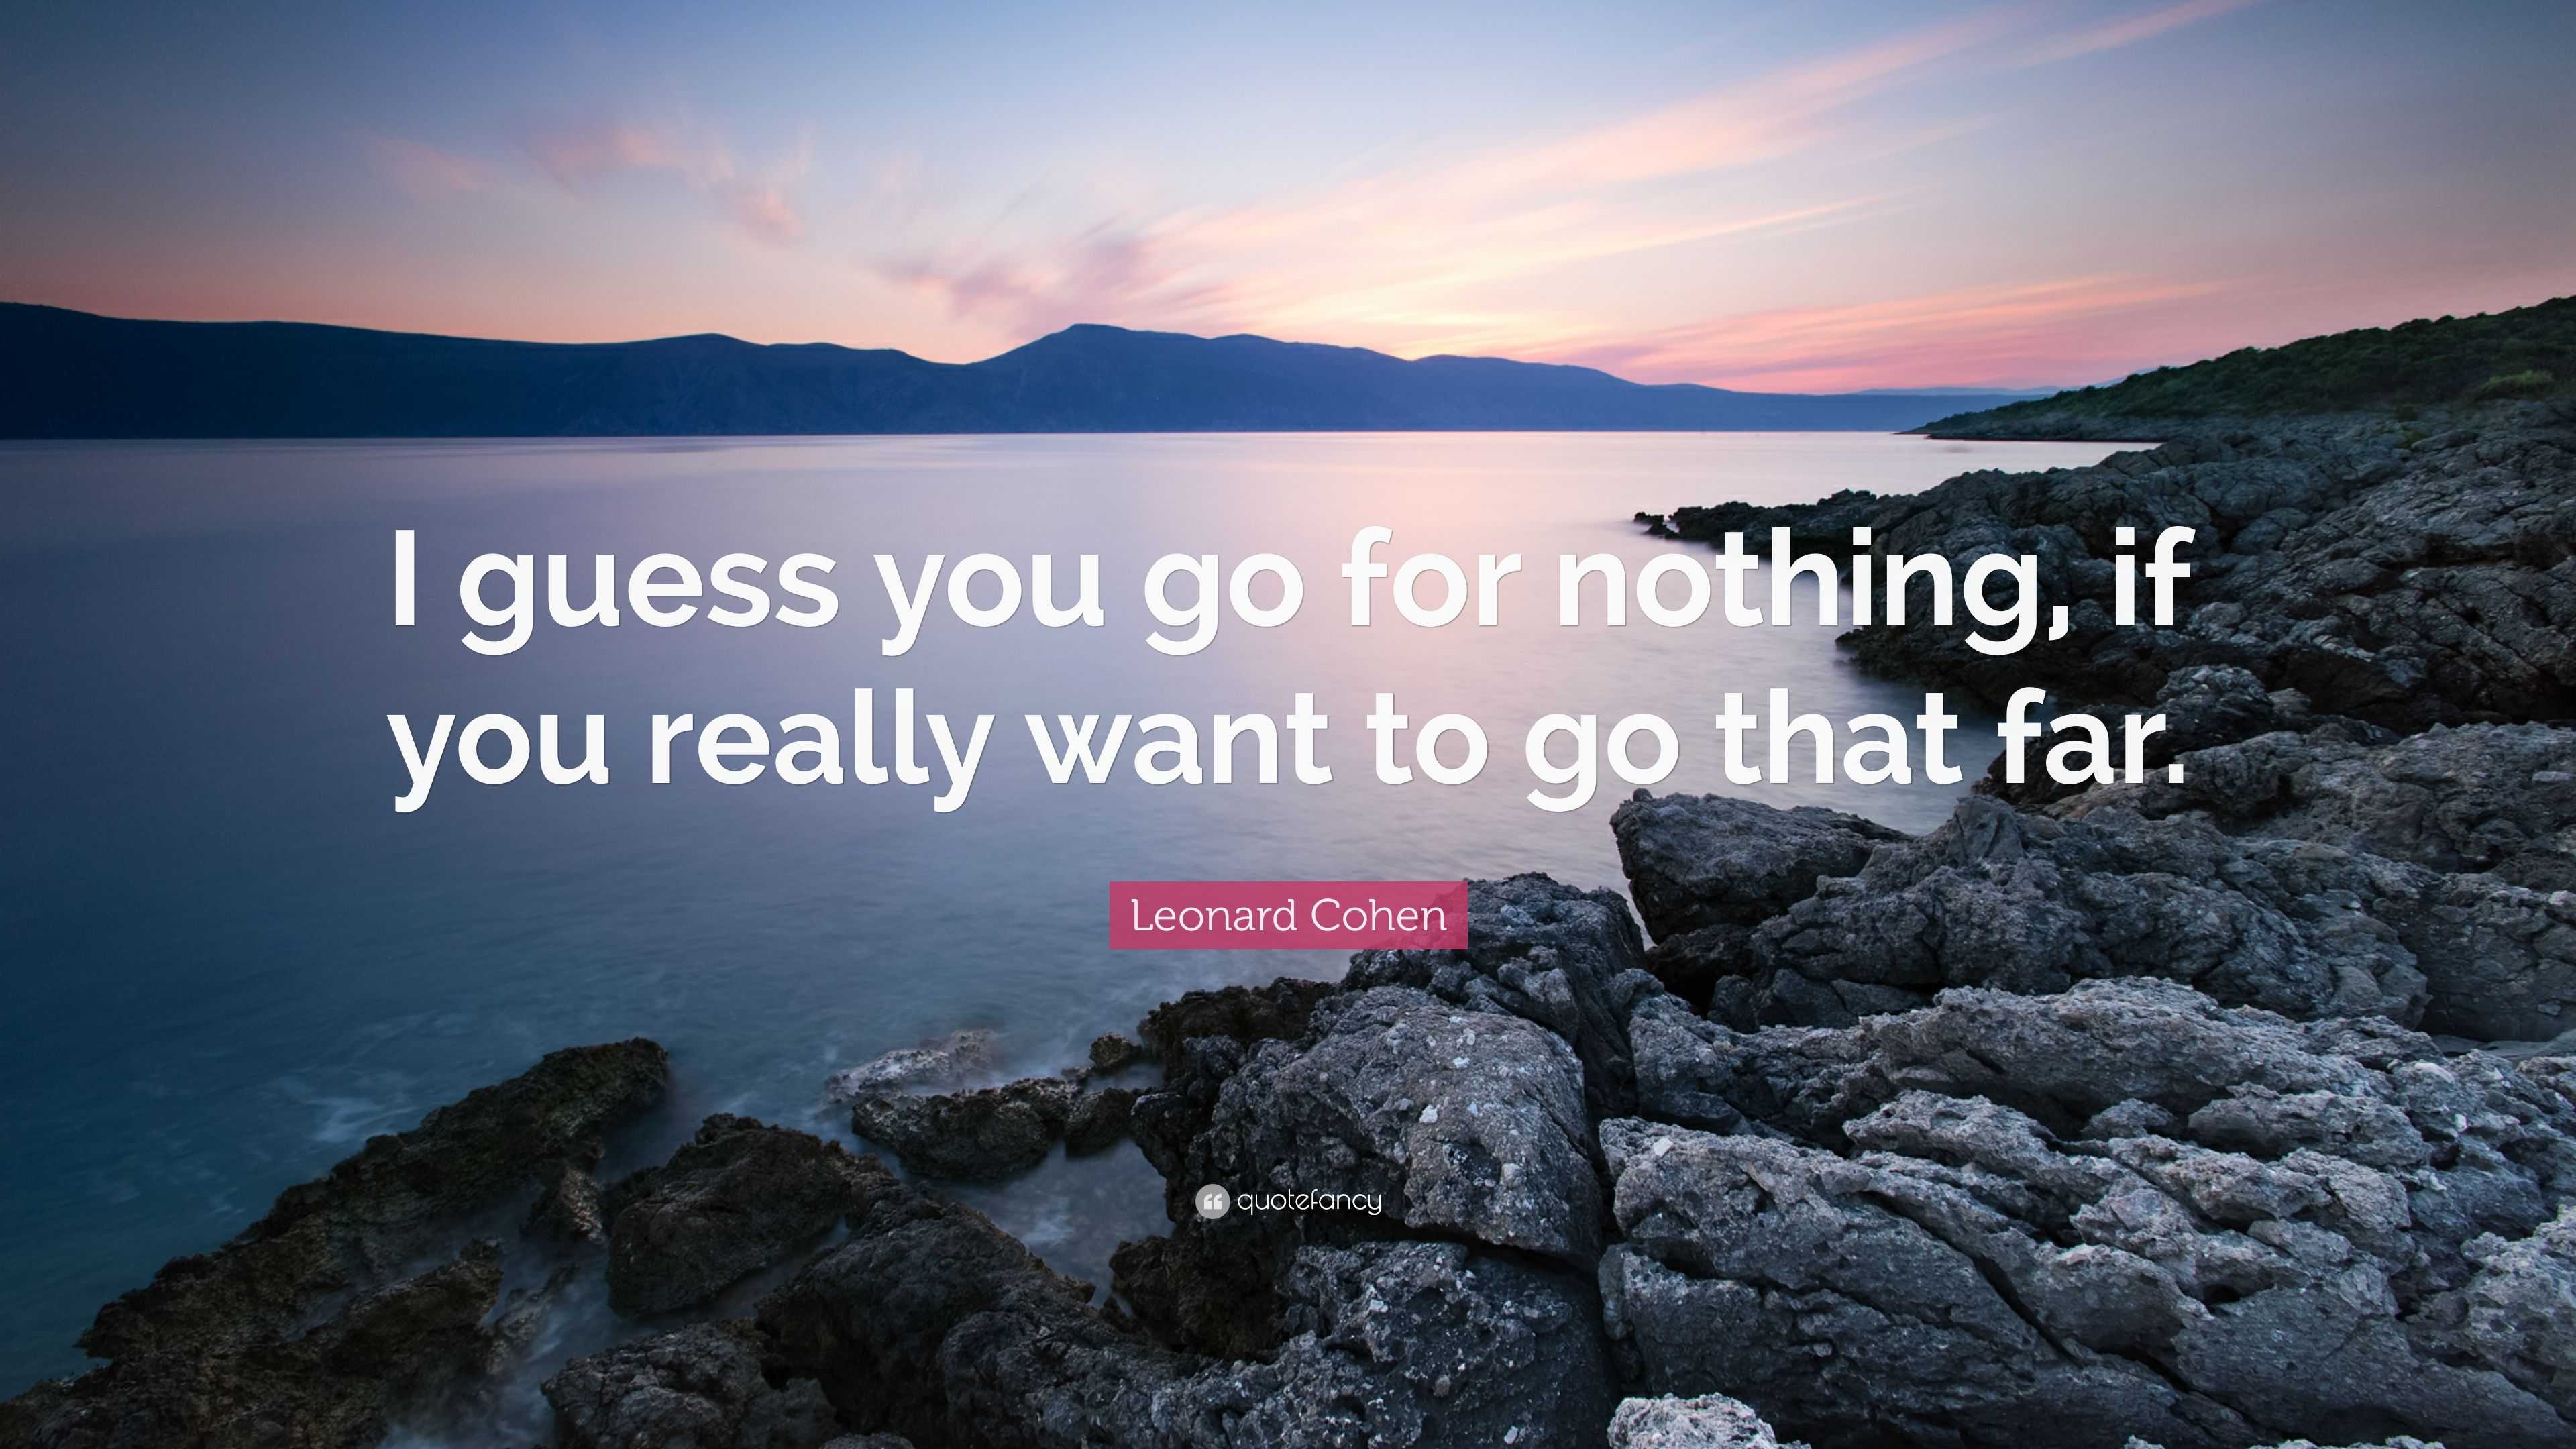 Leonard Quote: guess you go if you really want to go that